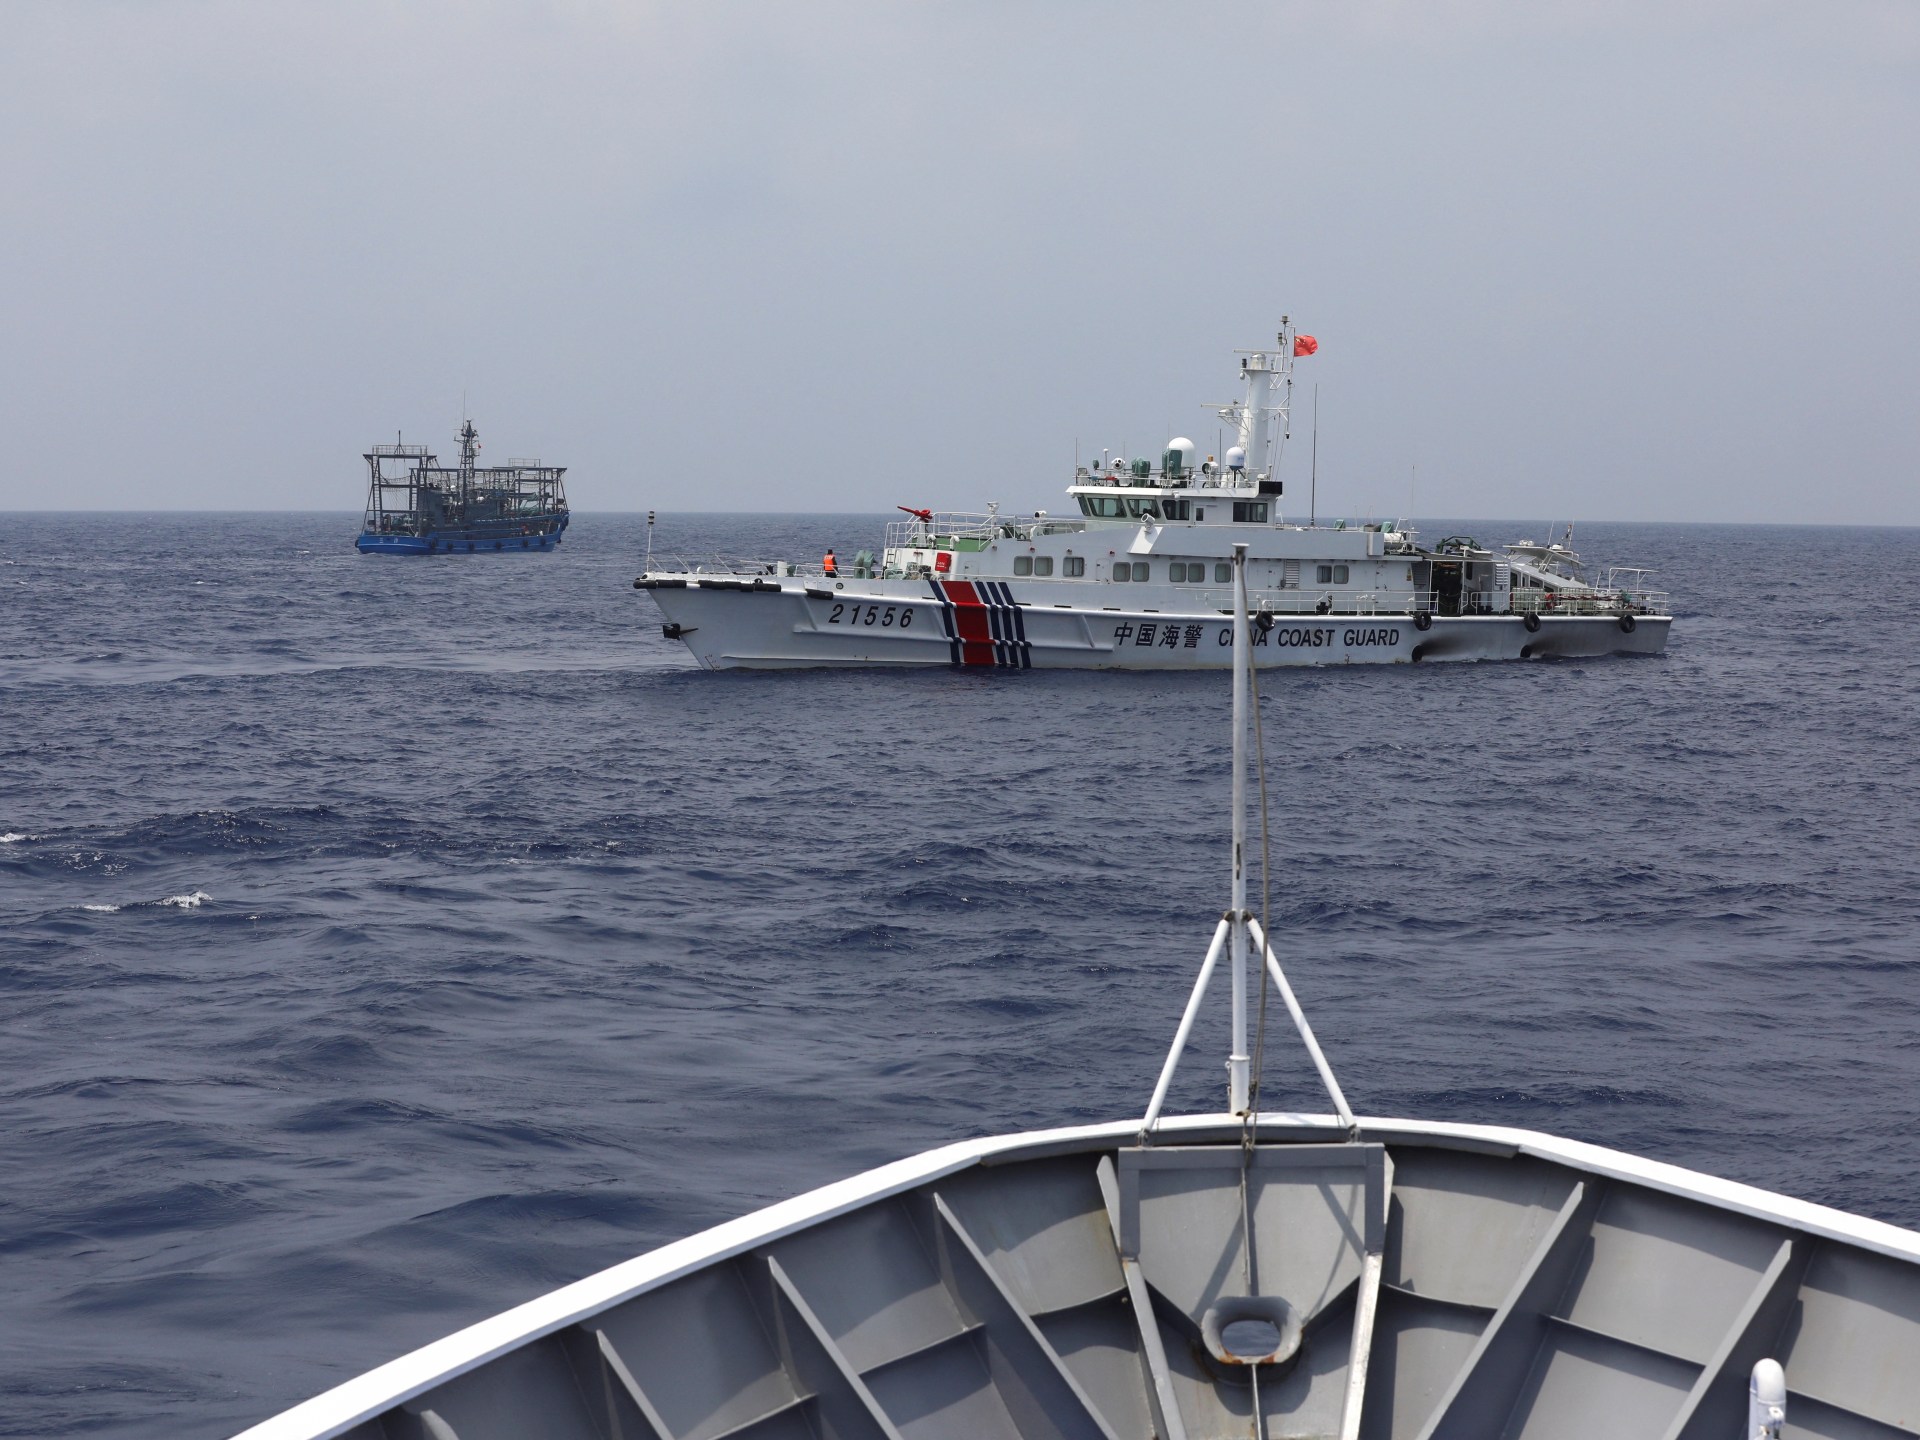 Philippines and China accuse each other of South China Sea collisions | South China Sea News